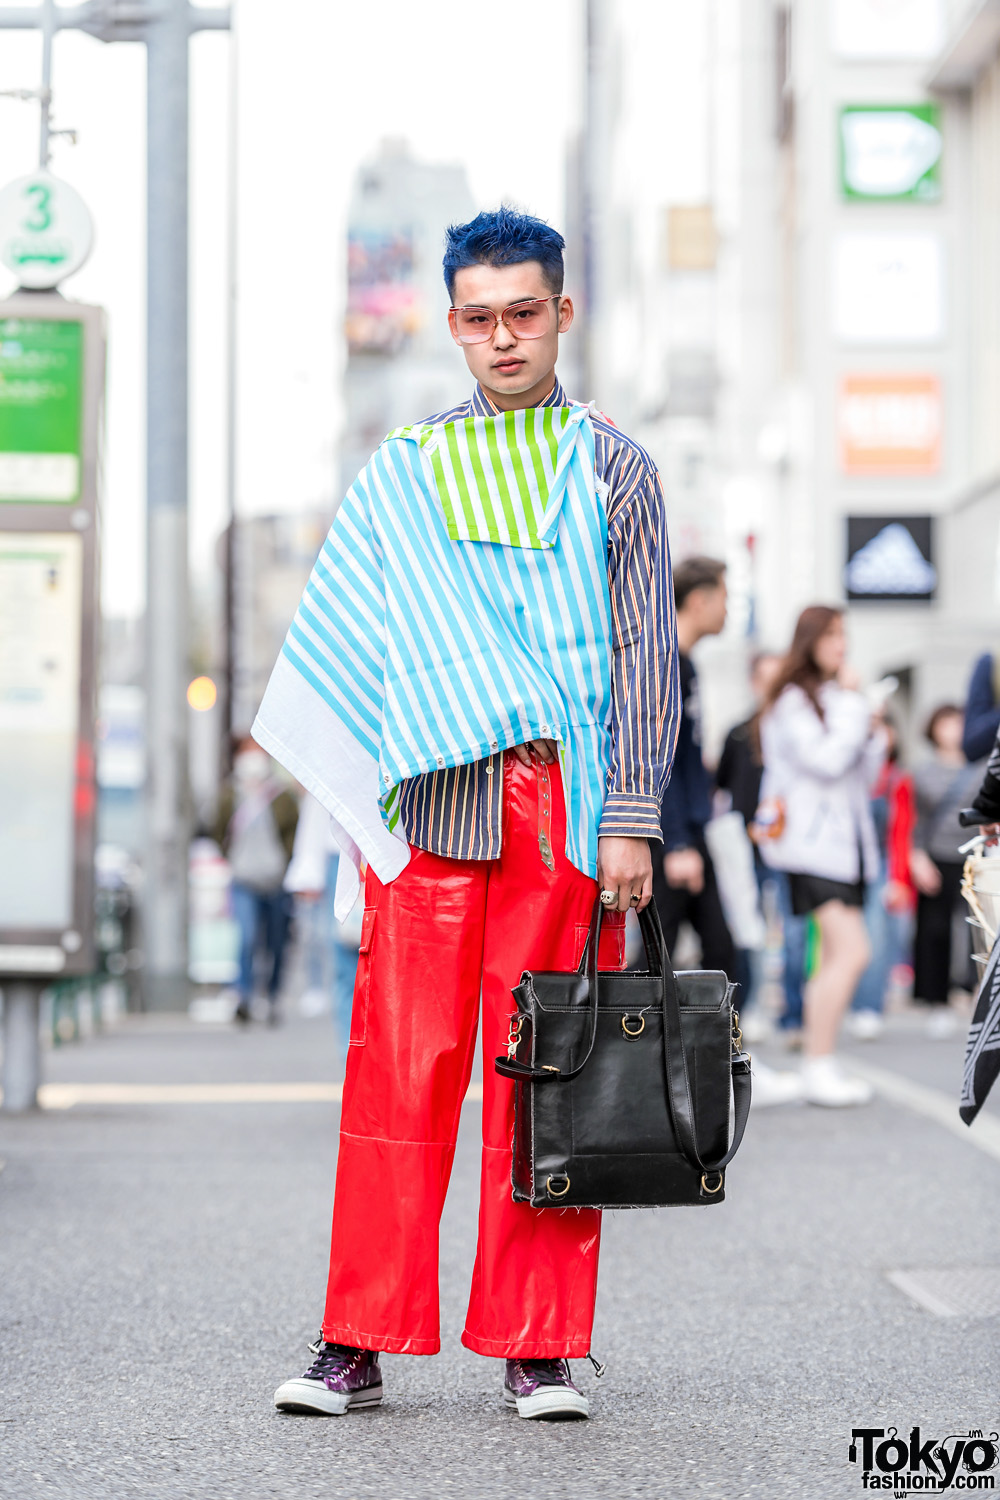 Harajuku Guy w/ Blue Hair, Mikio Sakabe Deconstructed Jacket, Striped Banana Republic Top, Red Pants & Converse Purple Sneakers